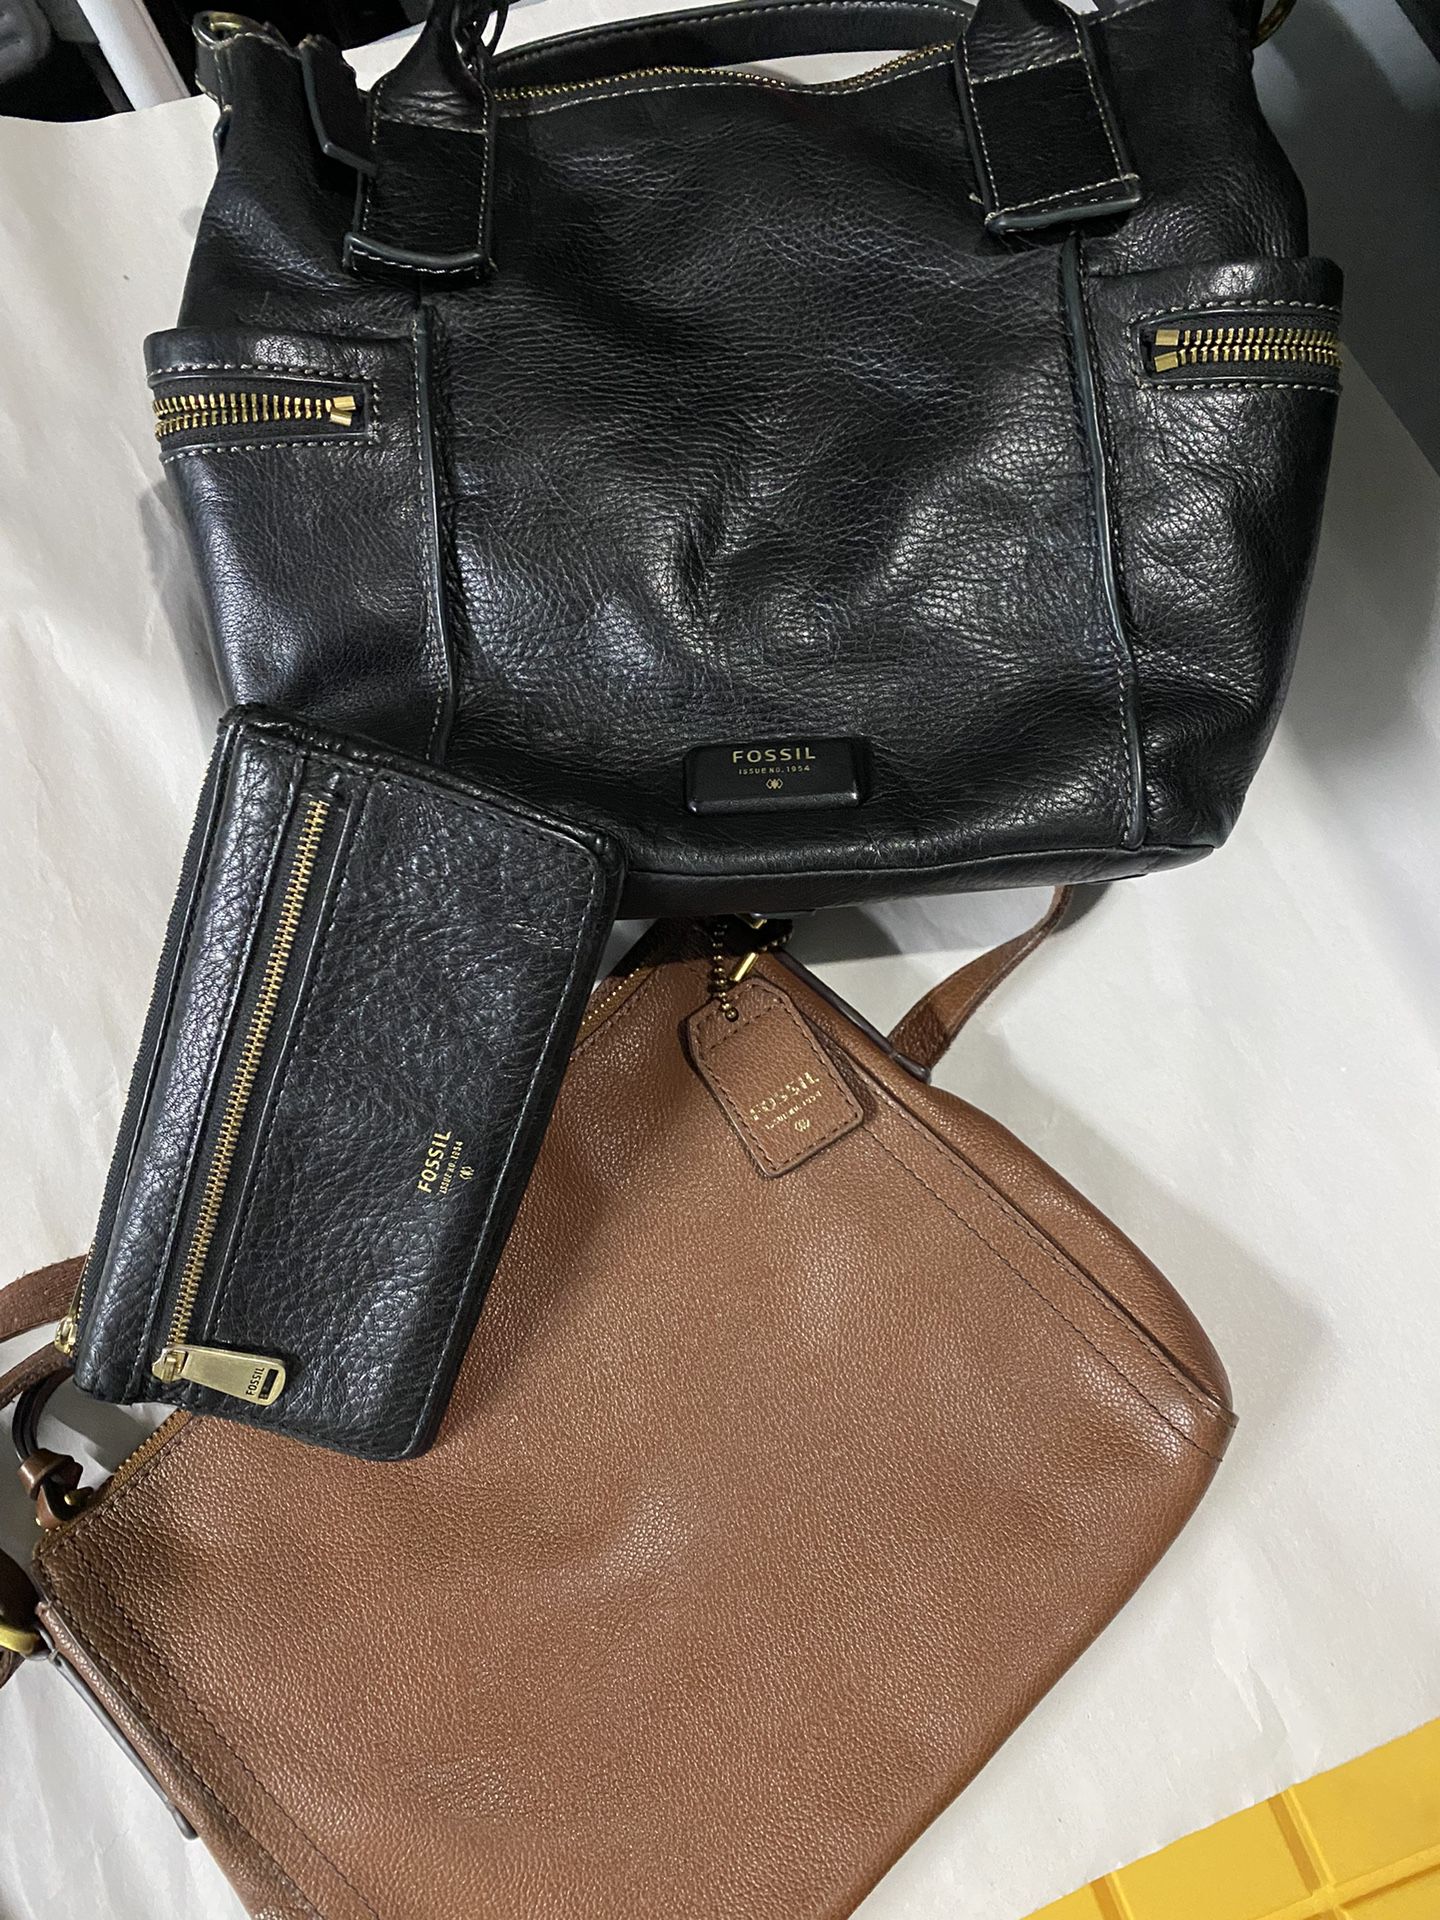 Fossil Leather Bags